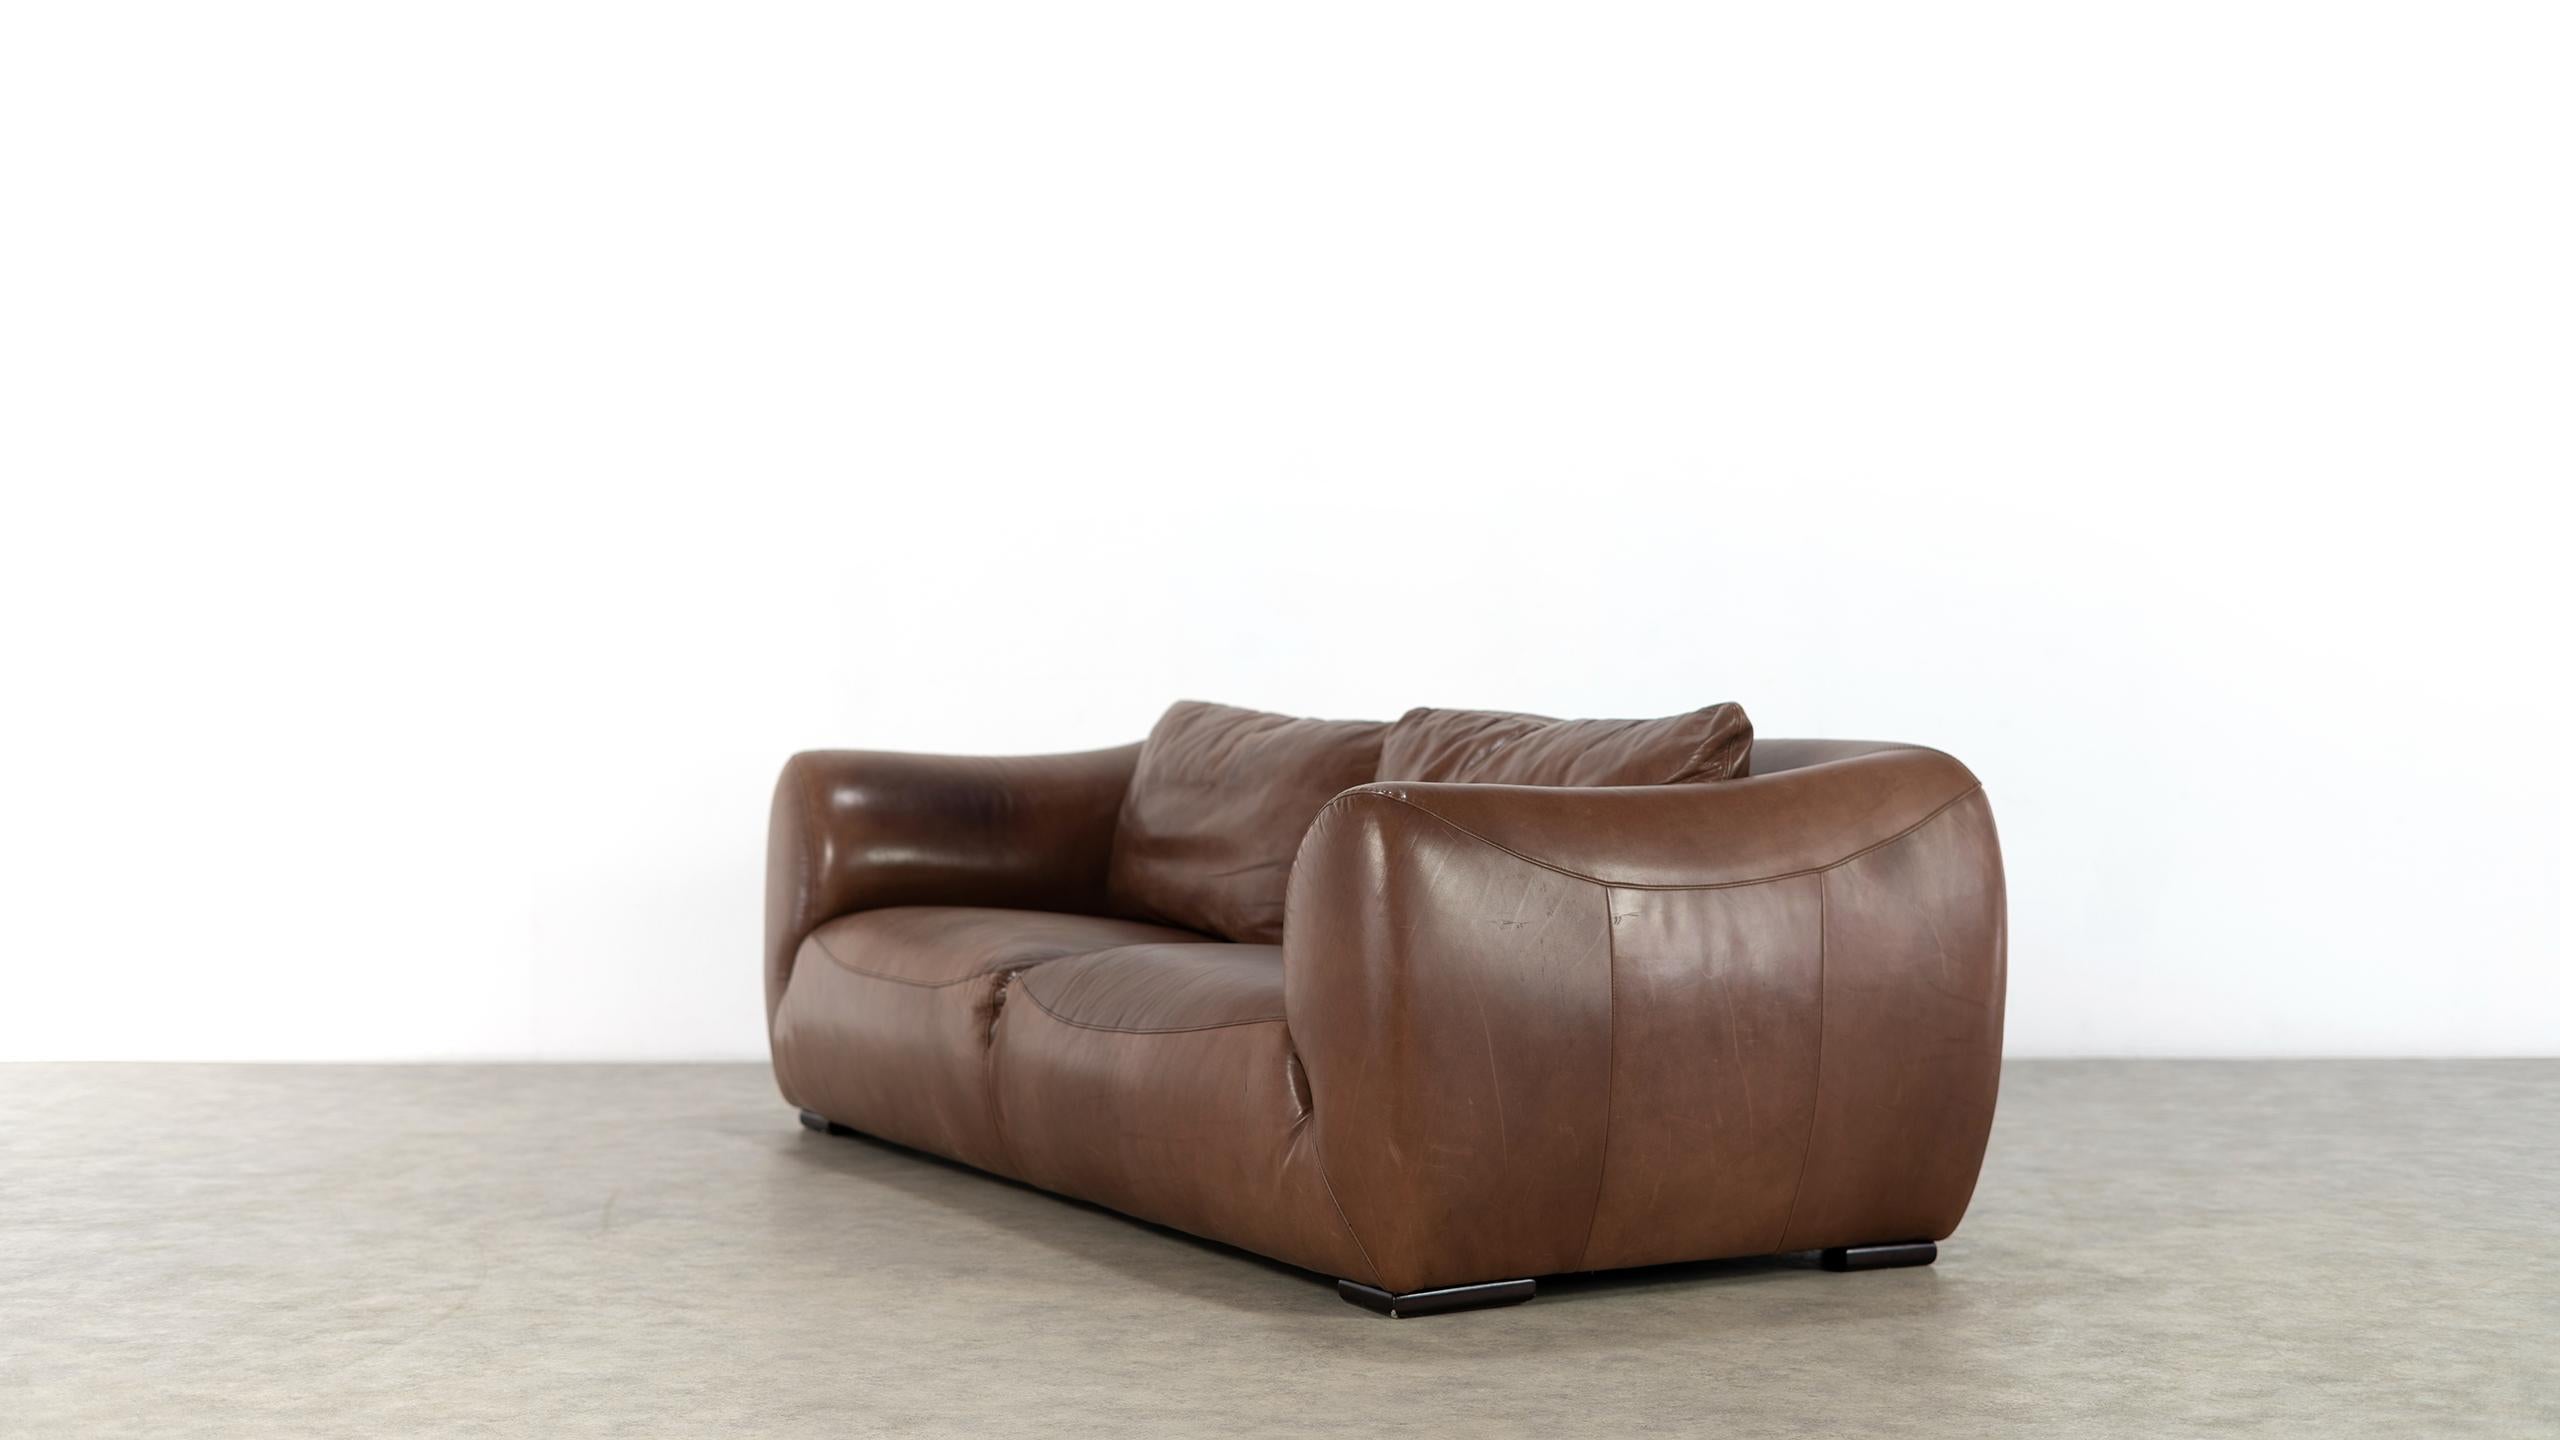 Late 20th Century Gerard van den Berg 'attr. to', Sofa in Chocolate Leather, 1970 Netherlands